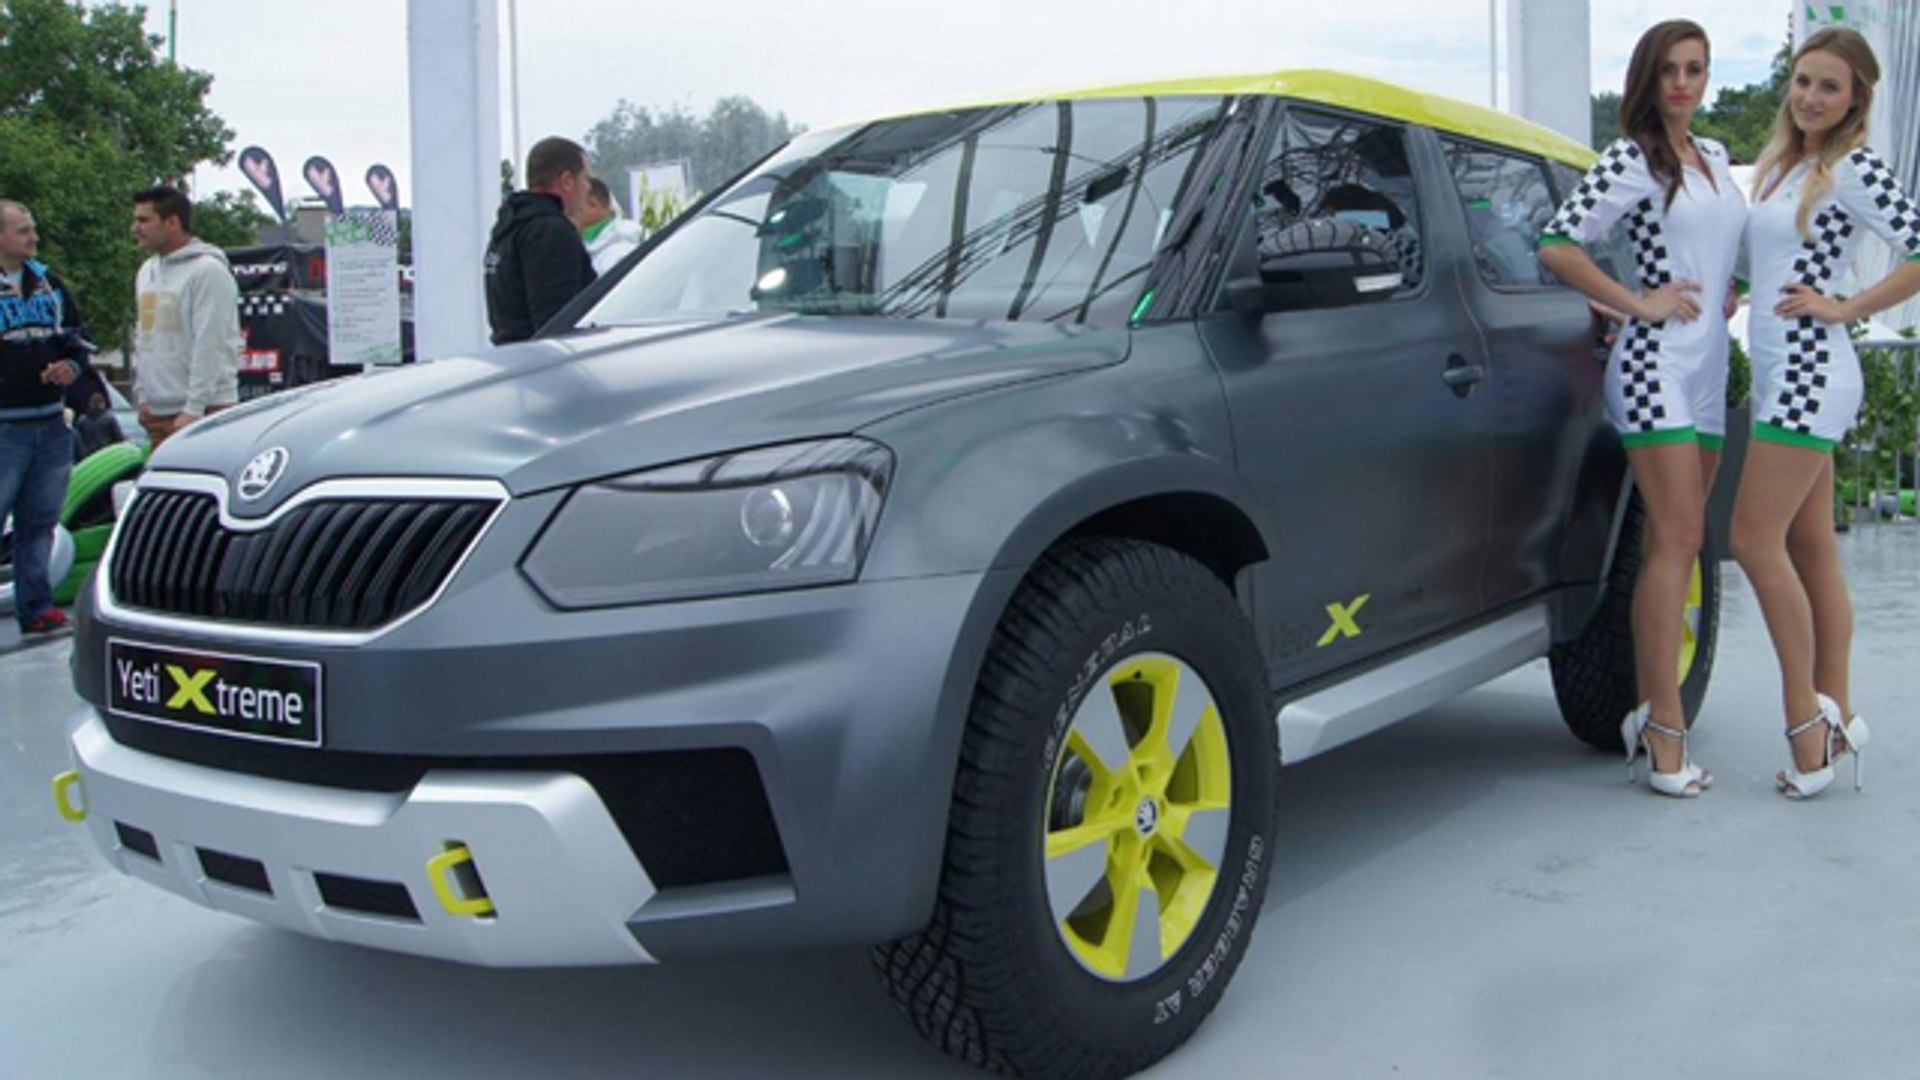 Skoda Yeti Xtreme Concept Debuts At Worthersee - video Dailymotion